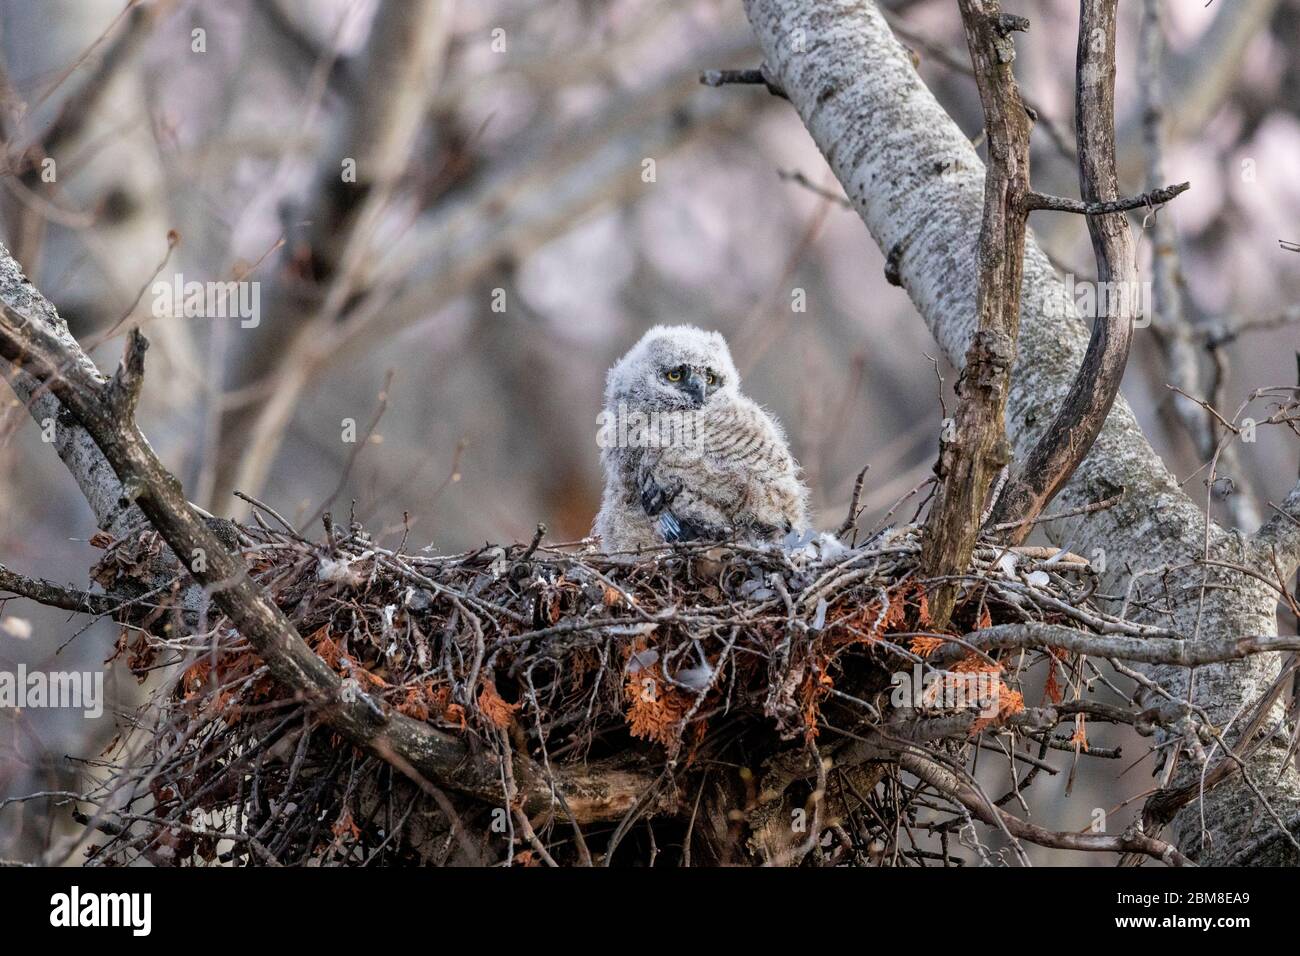 A wild nestling Great Horned Owlet ( Bubo Virginianus ), part of the Strigiformes order, and Strigidae family sits in a stick nest. Stock Photo